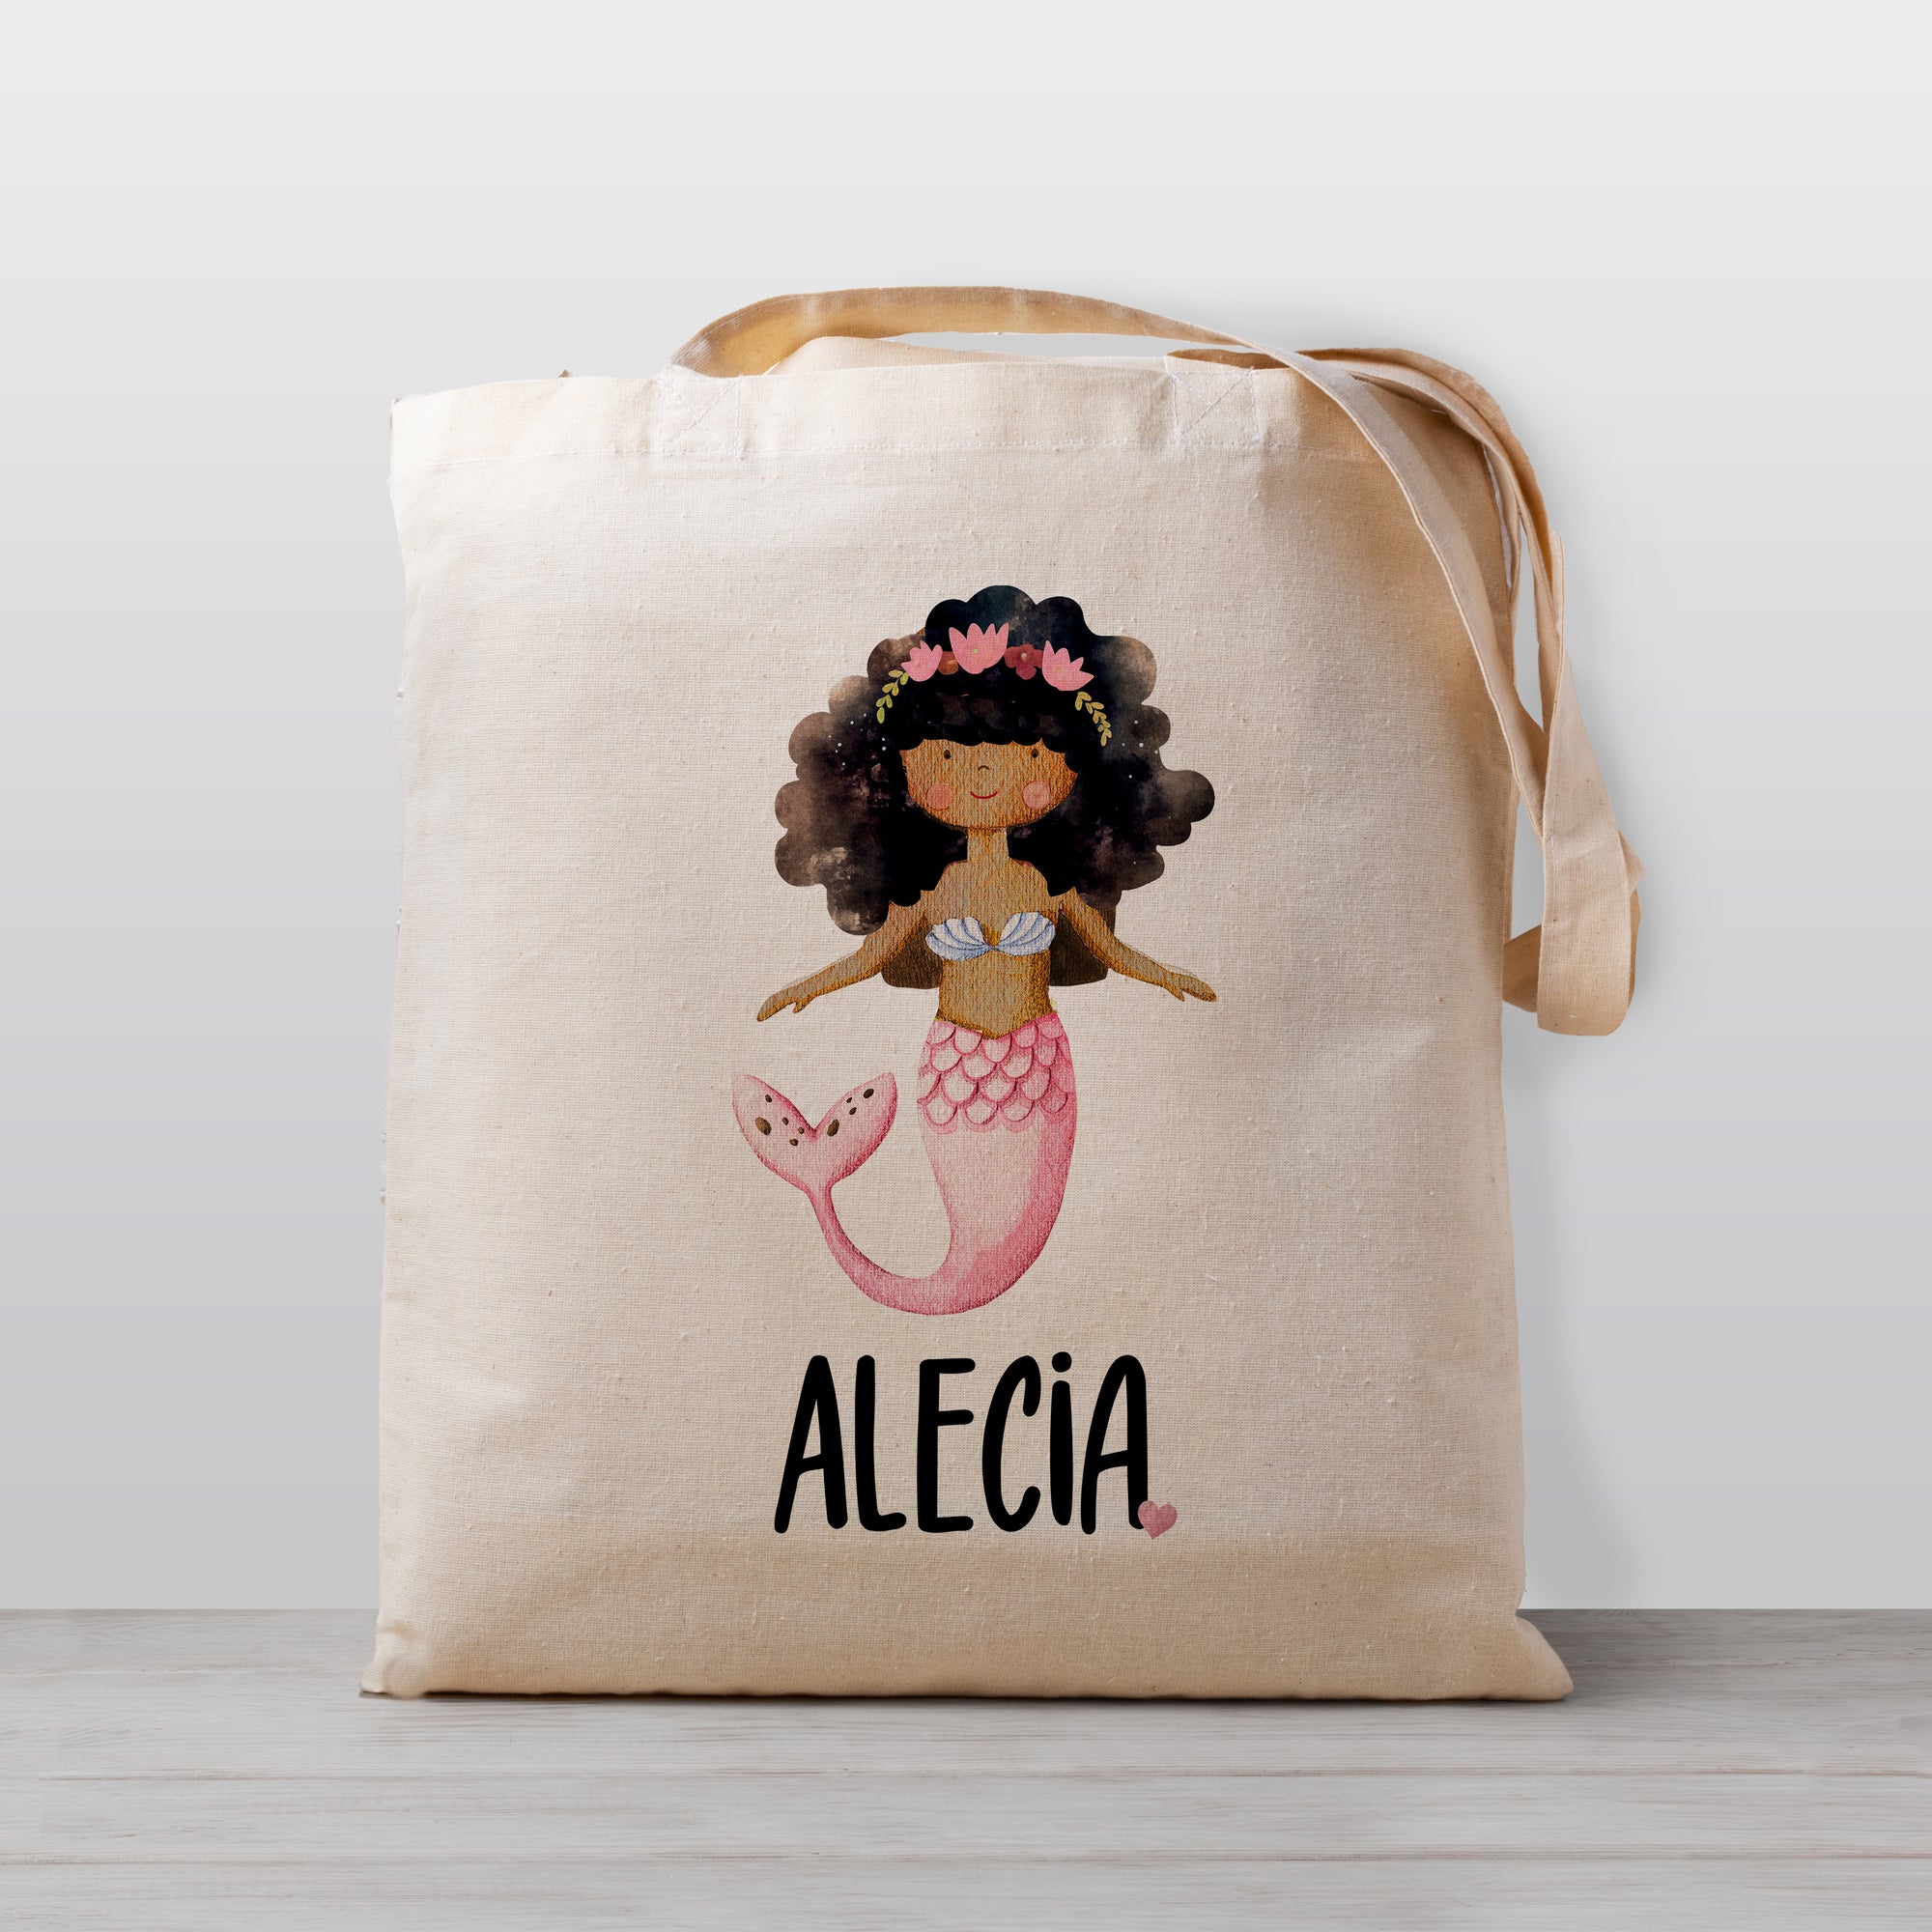 Black African American Mermaid tote bag personalized with name, 100% natural cotton canvas